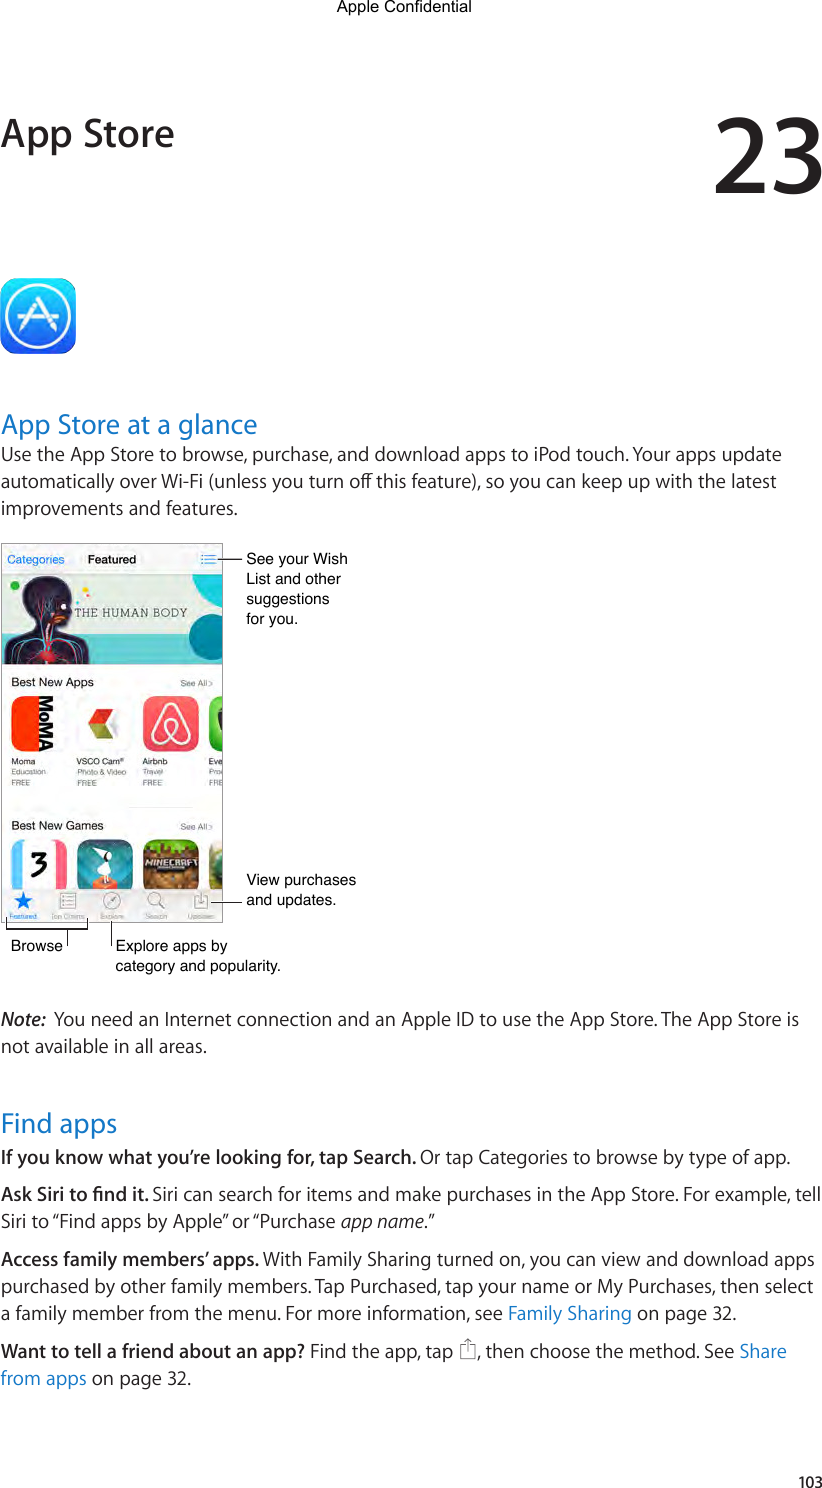 23103App Store at a glanceUse the App Store to browse, purchase, and download apps to iPod touch. Your apps update automaticallyoverWi-Fi(unlessyouturnothisfeature),soyoucankeepupwiththelatestimprovements and features.View purchases and updates.View purchases and updates.BrowseBrowseExplore apps by category and popularity.Explore apps by category and popularity.See your Wish List and other suggestionsfor you.See your Wish List and other suggestionsfor you.Note:  You need an Internet connection and an Apple ID to use the App Store. The App Store is not available in all areas.Find appsIf you know what you’re looking for, tap Search. Or tap Categories to browse by type of app.Ask Siri to nd it. Siri can search for items and make purchases in the App Store. For example, tell Siri to “Find apps by Apple” or “Purchase app name.”Access family members’ apps. With Family Sharing turned on, you can view and download apps purchased by other family members. Tap Purchased, tap your name or My Purchases, then select a family member from the menu. For more information, see Family Sharing on page 32.Want to tell a friend about an app? Find the app, tap  , then choose the method. See Share from apps on page 32.App StoreApple Confidential